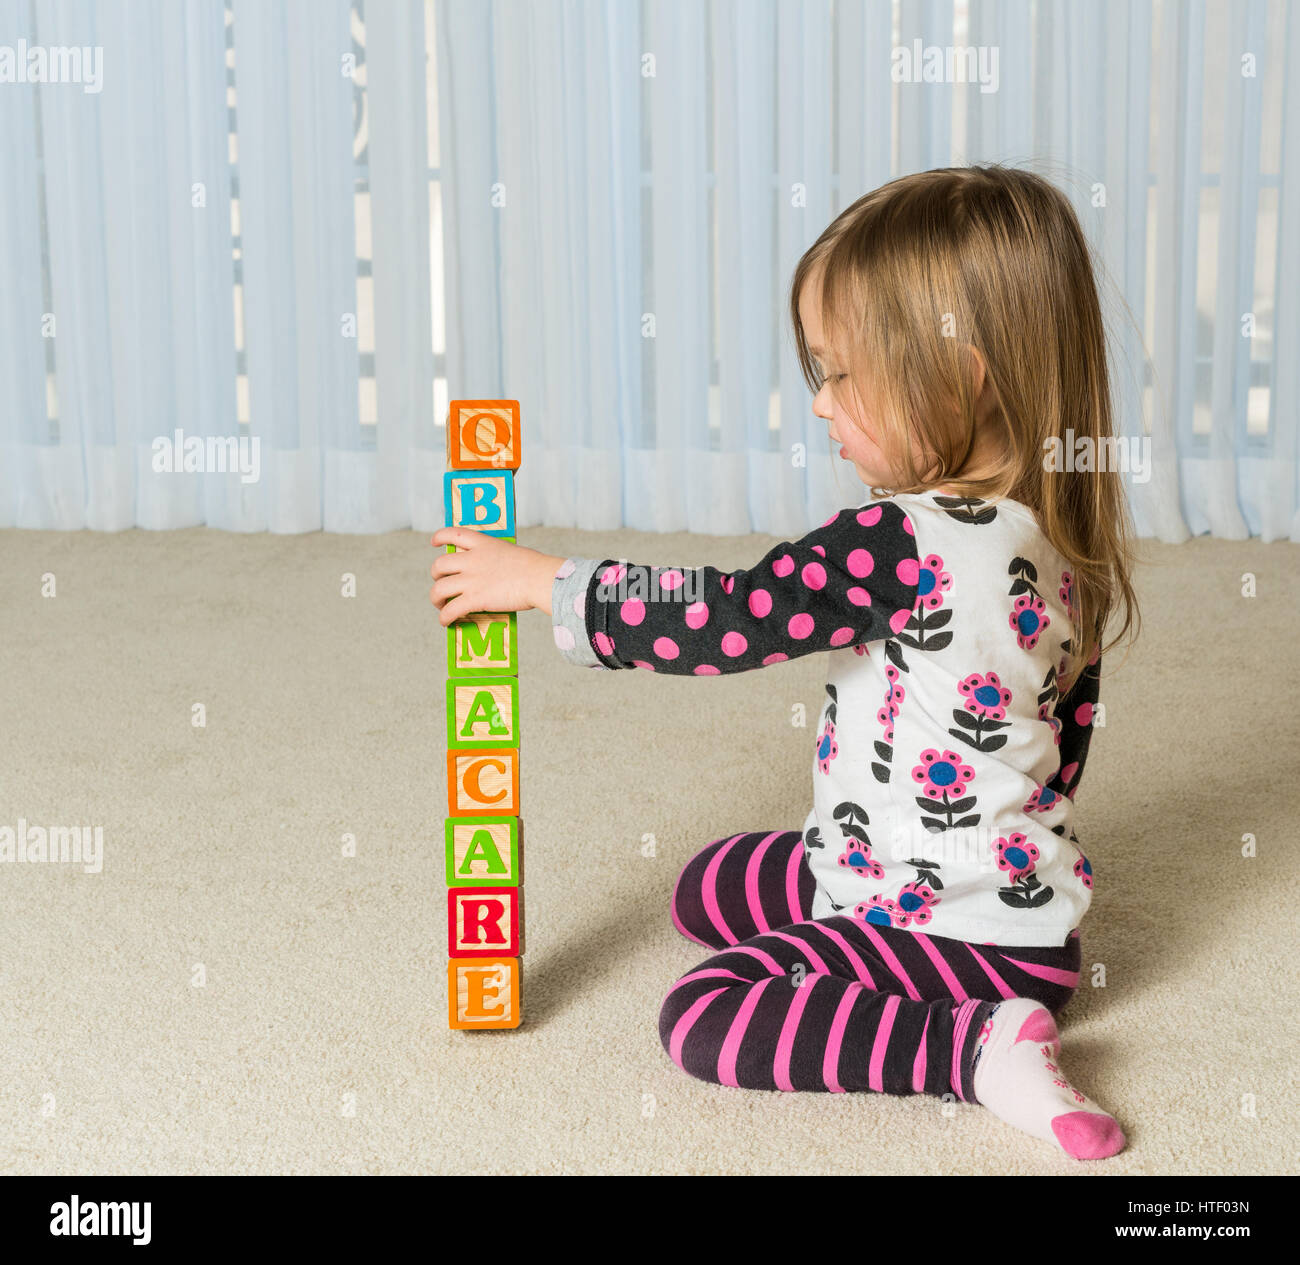 Young female toddler knocking down a tower of wooden blocks at home spelling Obamacare Stock Photo